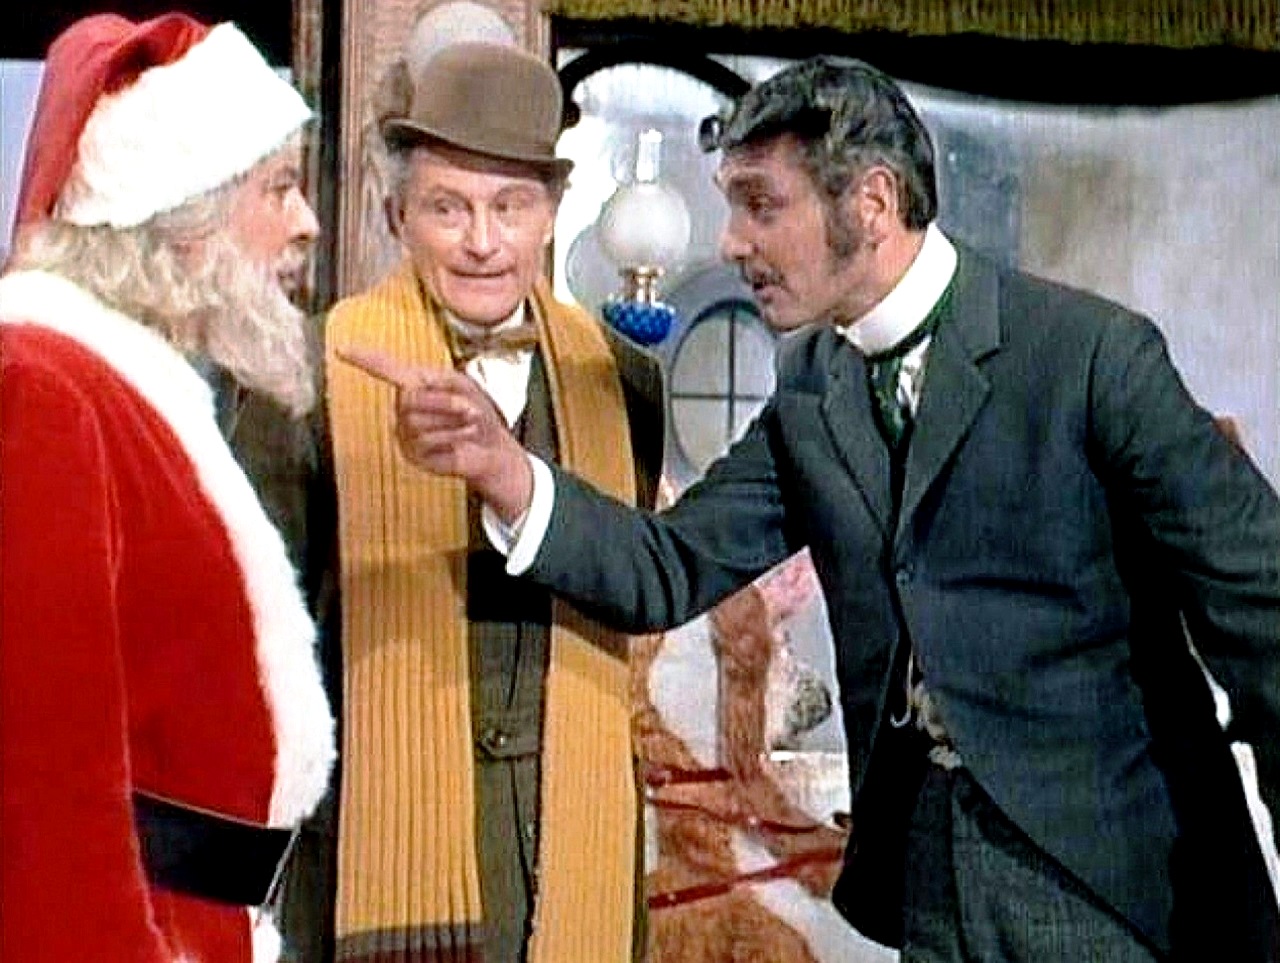 Santa (Alberto Rabagliati), Paul Whipp and Sonny Fox in The Christmas That Almost Wasn't (1966)